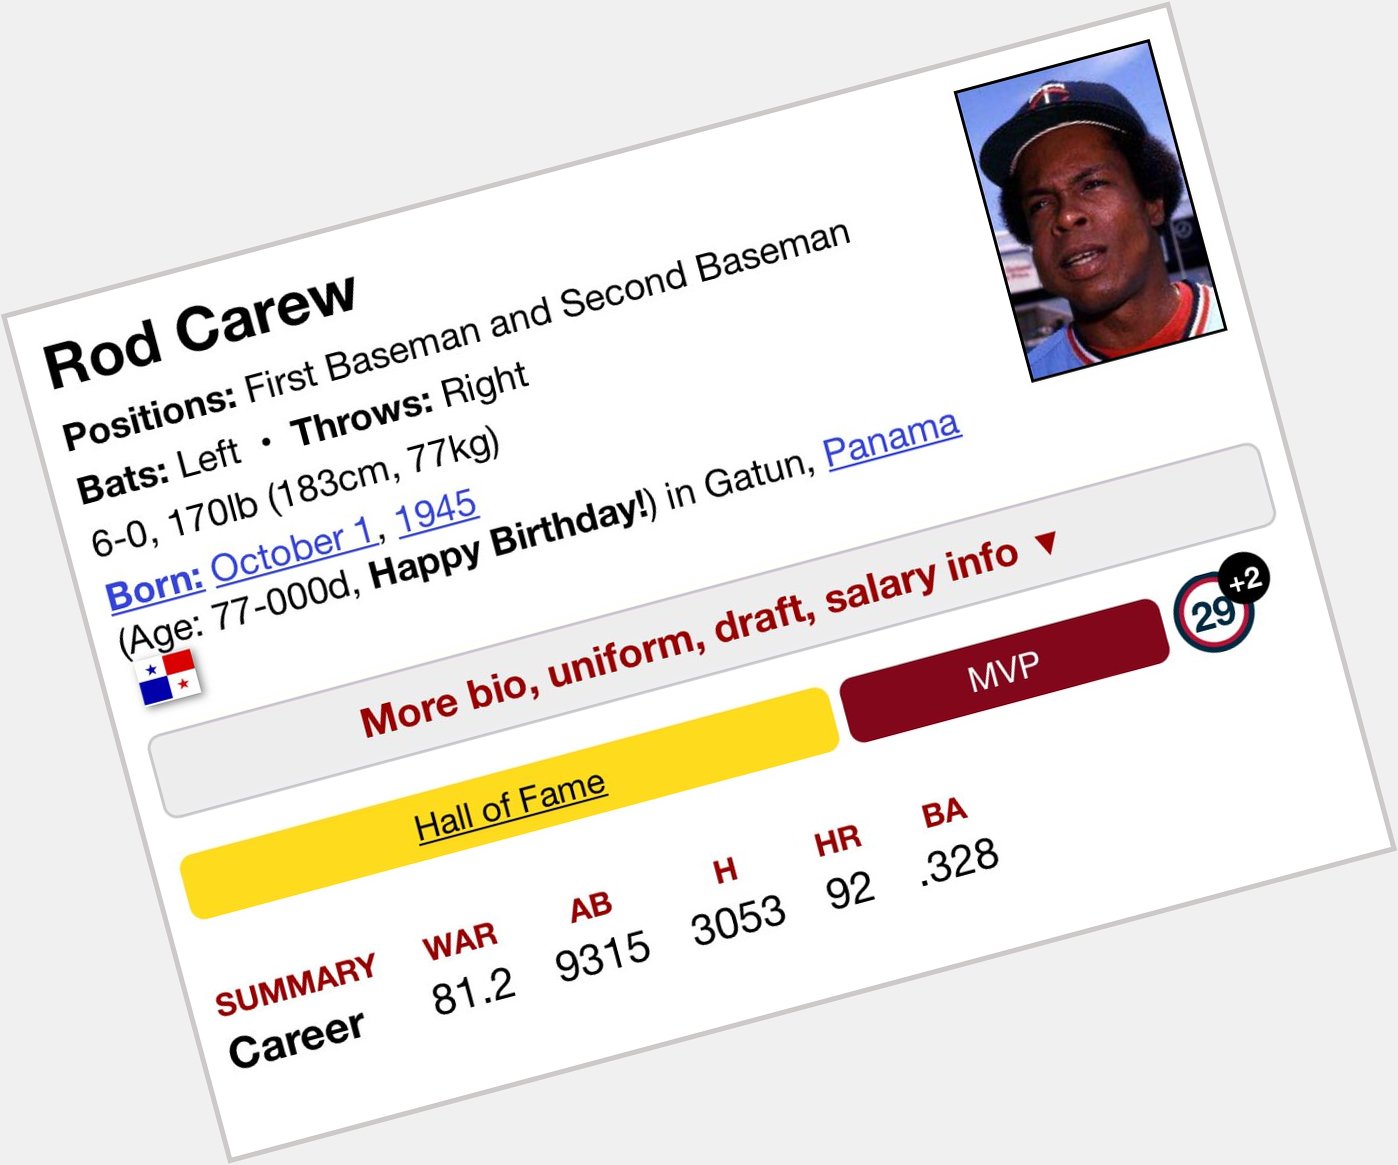   Happy Birthday!    I mention you, Rod Carew, in any discussion of baseball greats. 